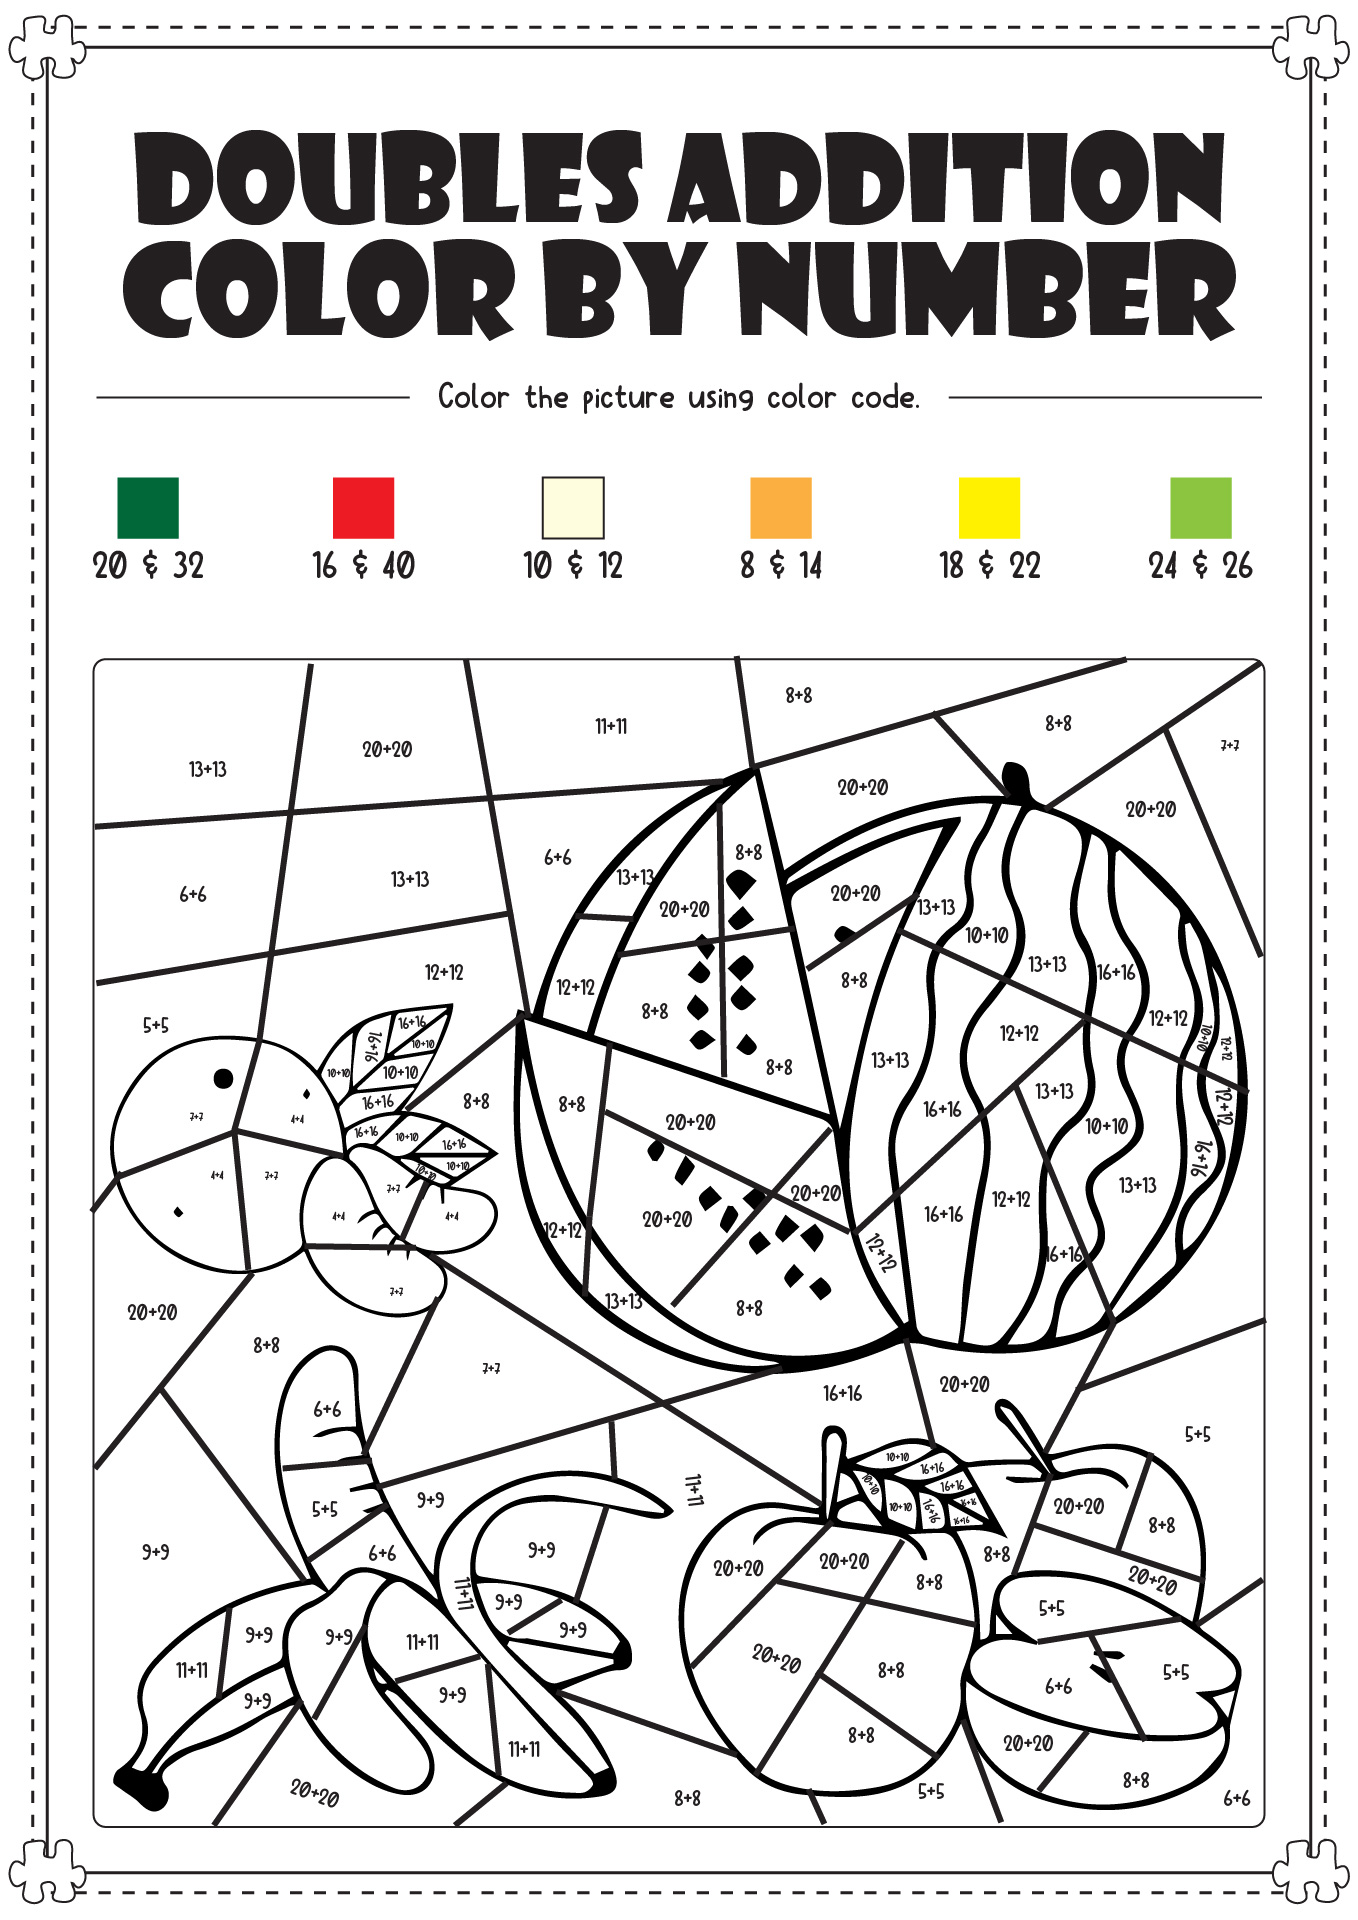 Doubles Addition Color by Number